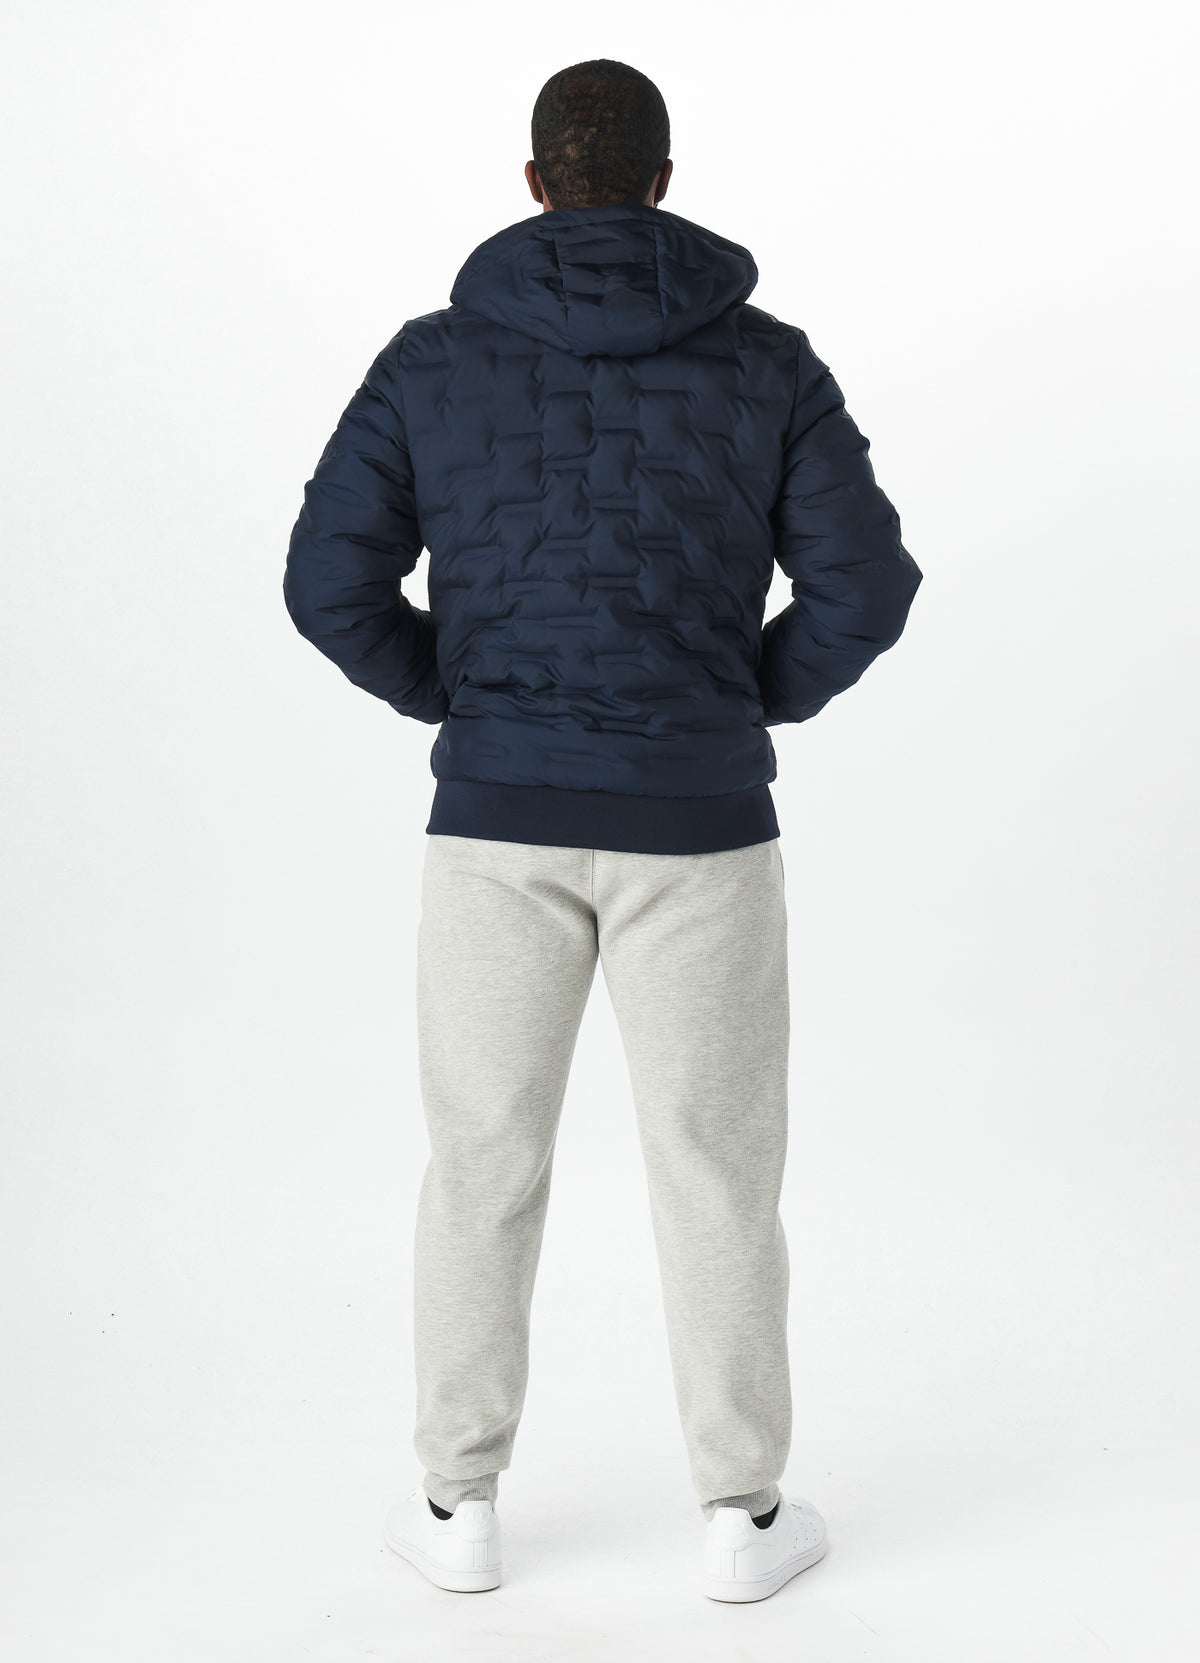 Quilted Hooded Jacket CARVER Dark Navy - Pitbull West Coast International Store 